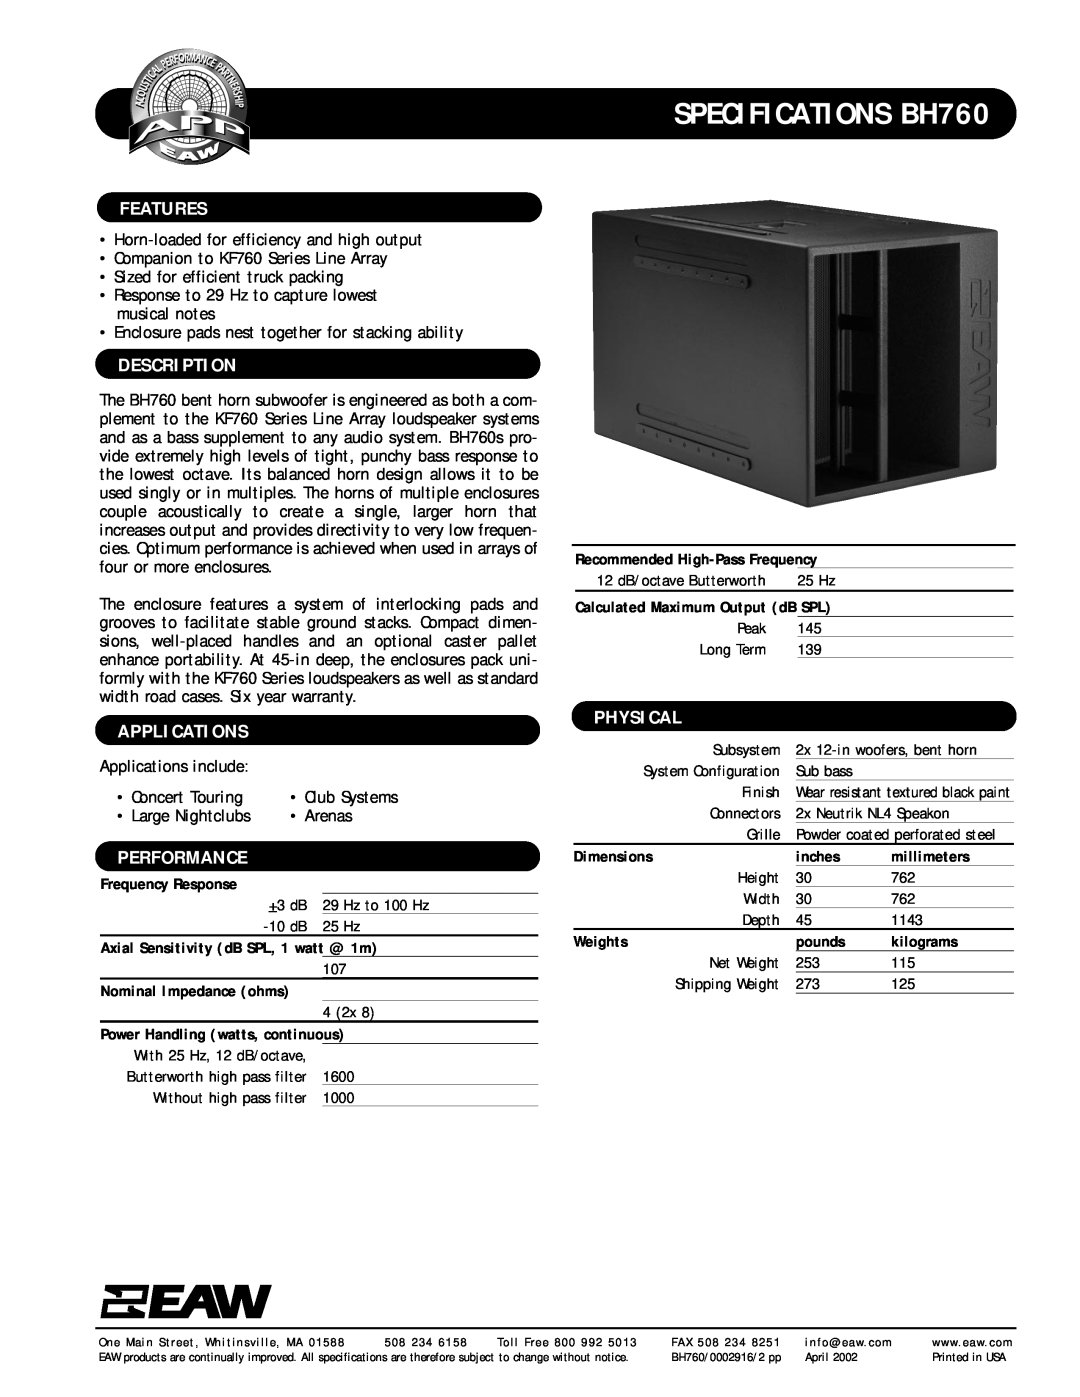 EAW specifications SPECIFICATIONS BH760, Features, Description, Applications, Performance, Physical 